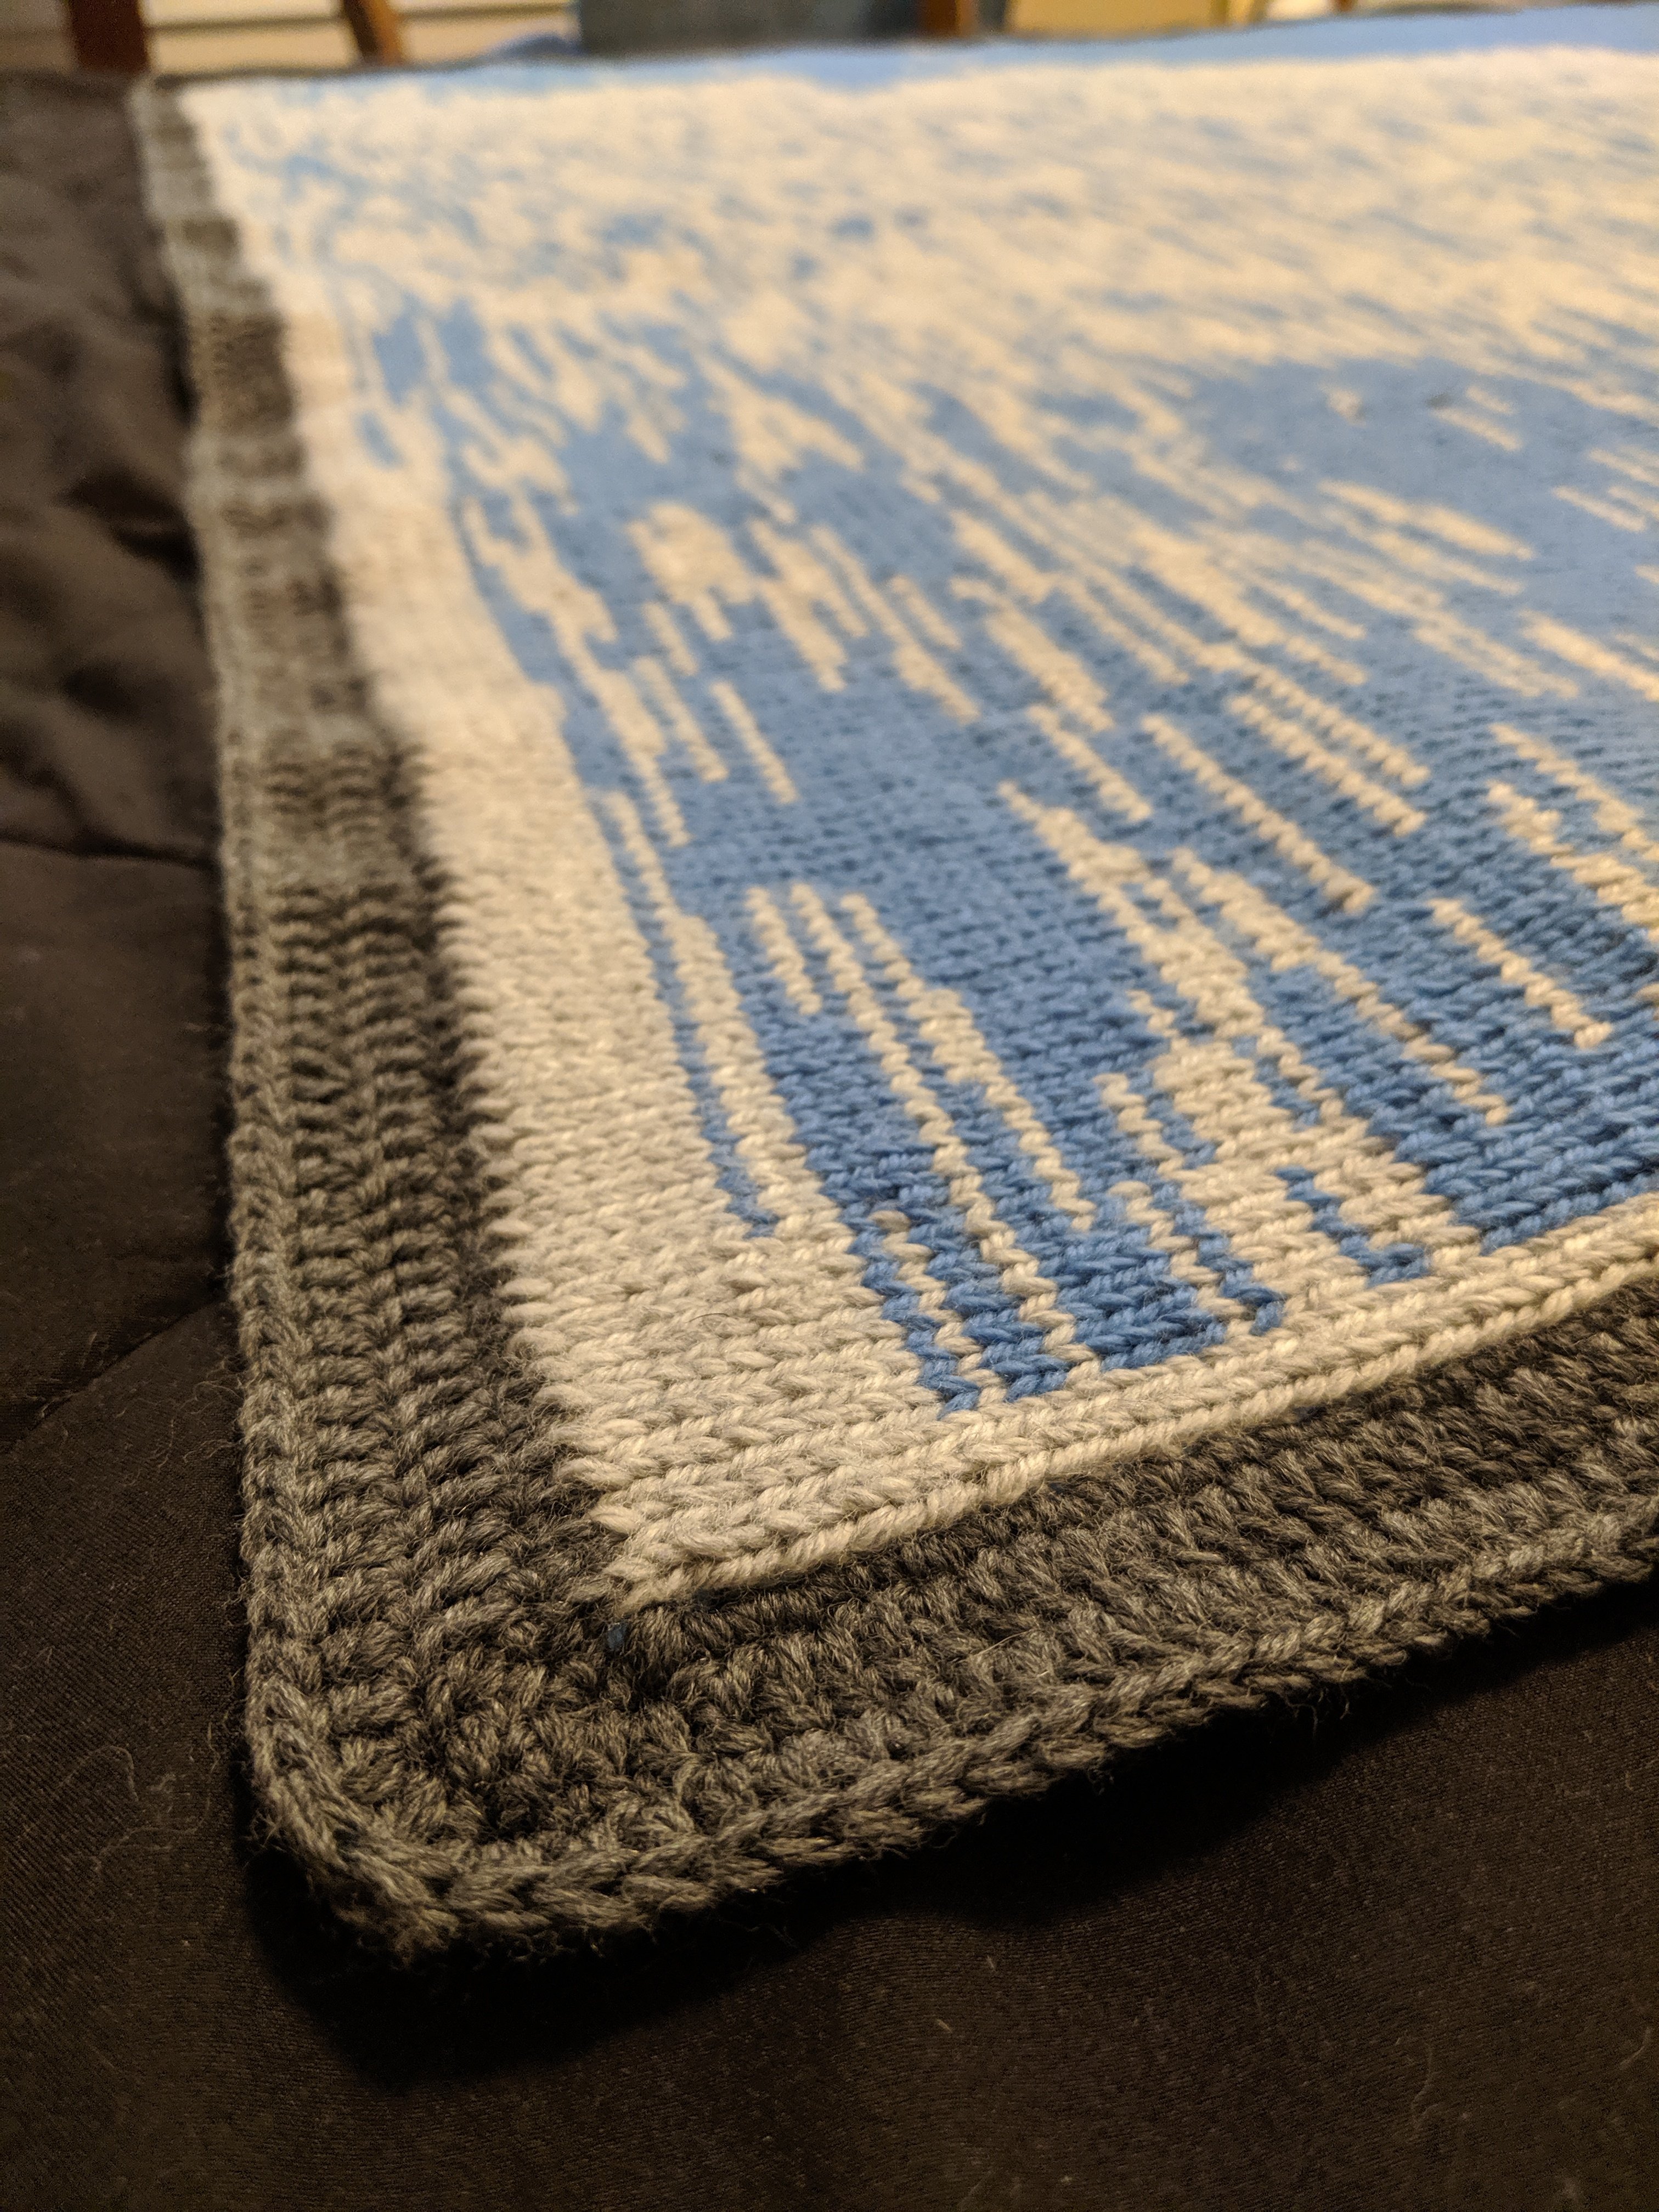 The Best Baby Blanket ... Each Stitch Represents Six Minutes Spent Awake Or Asleep